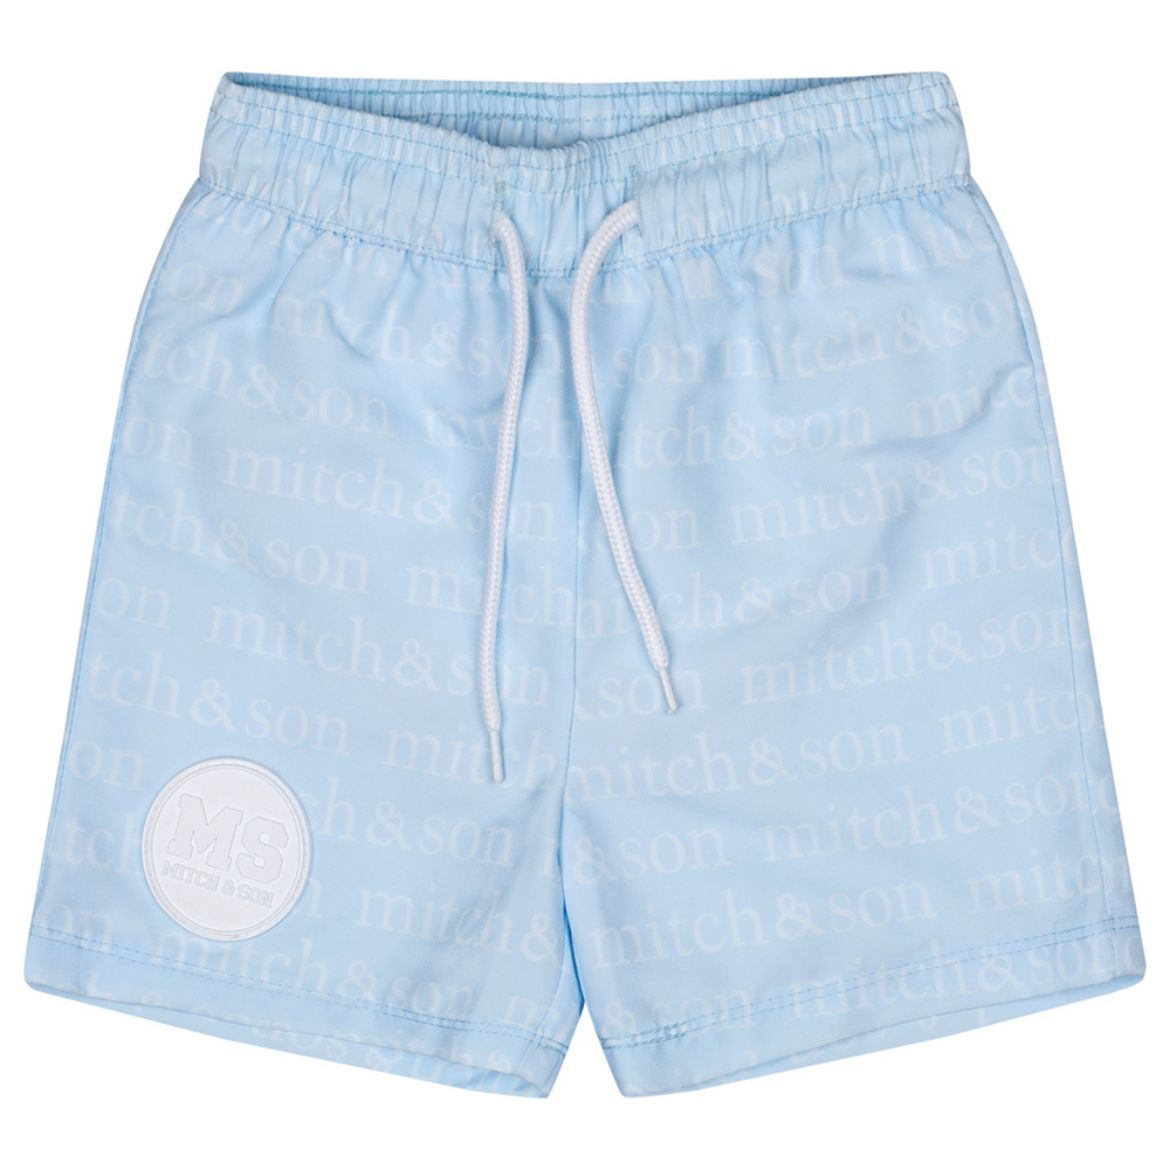 Picture of Mitch & Son Triston Blue Swimshorts 